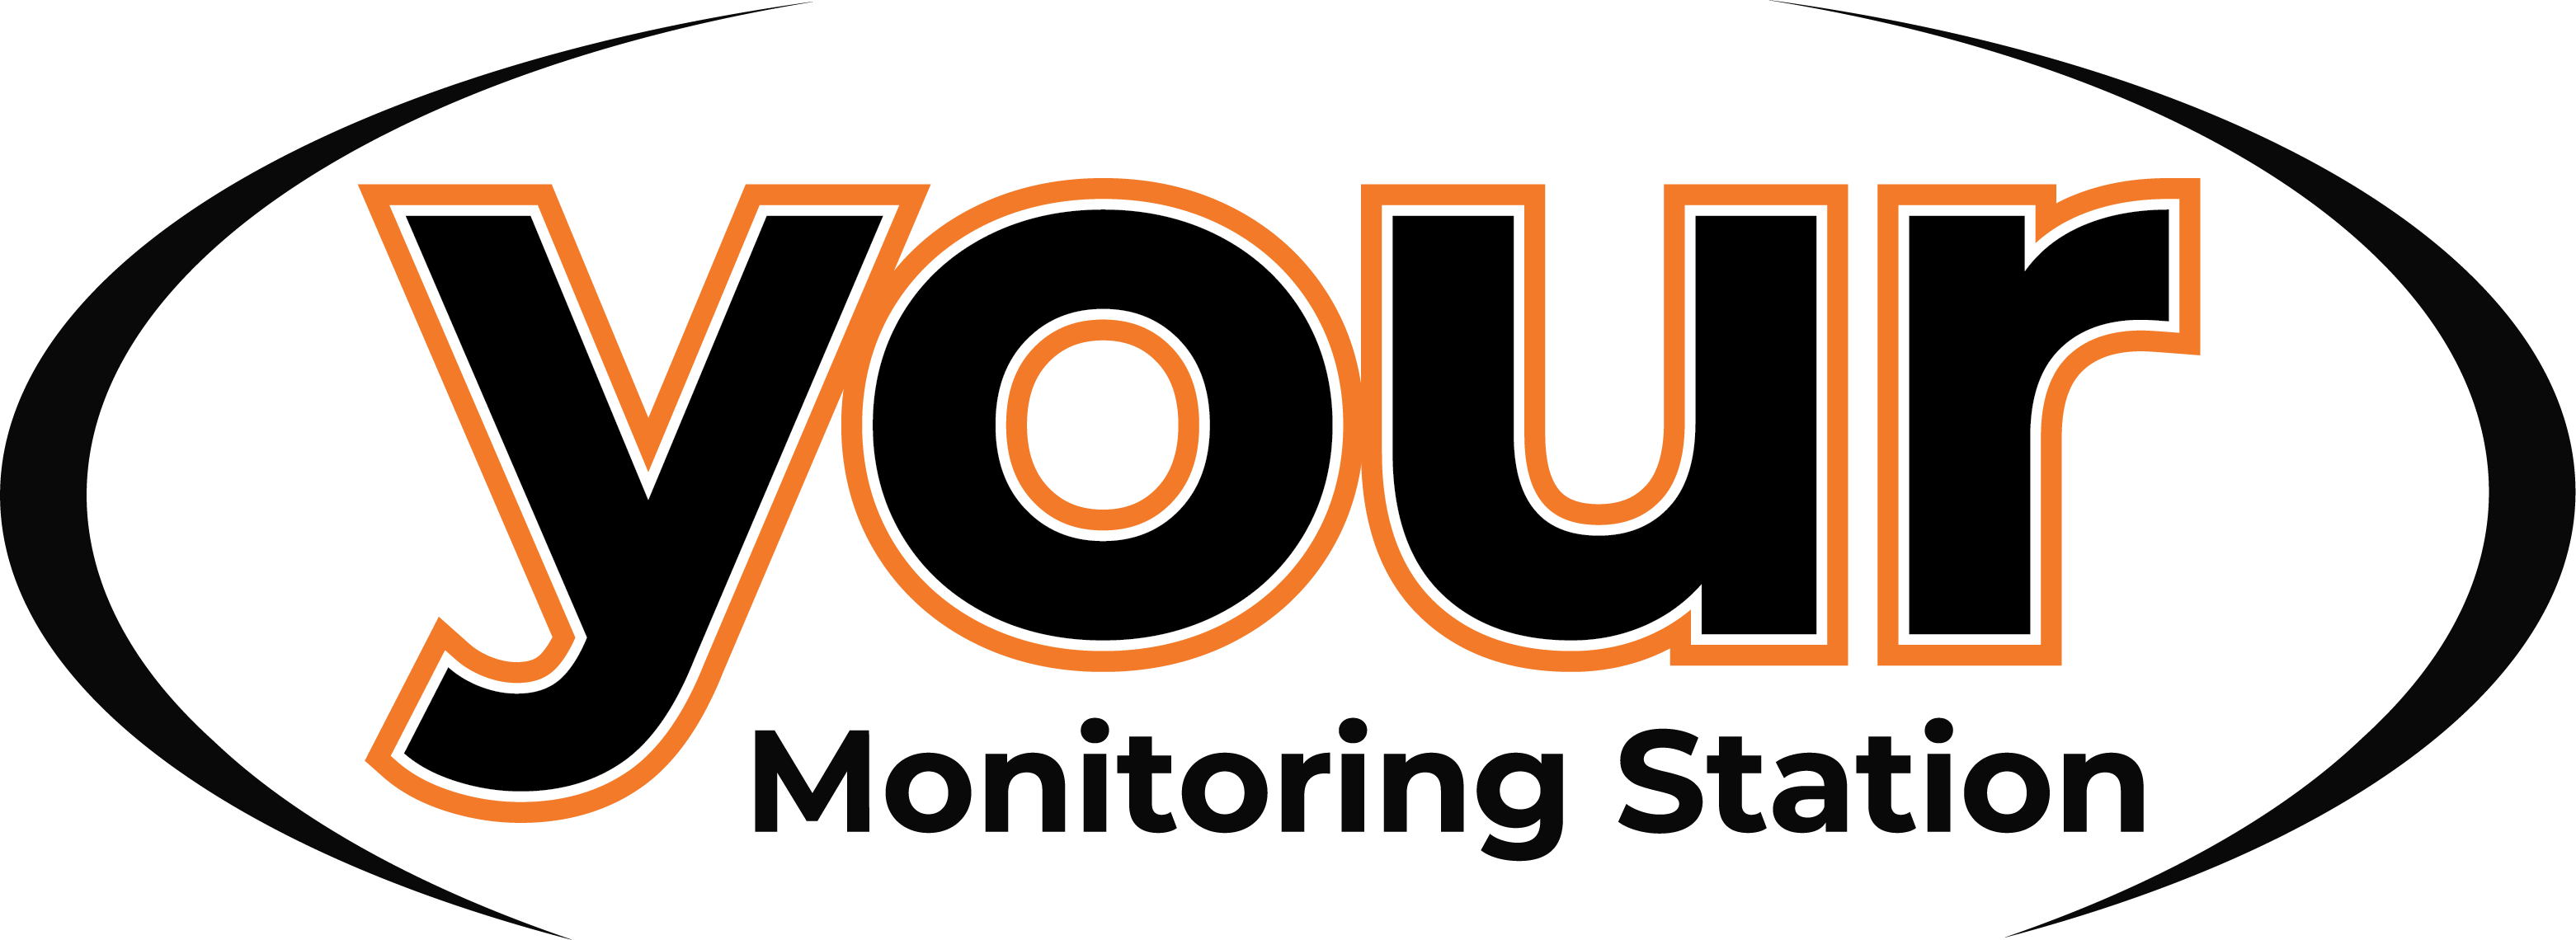 WorkHorse Service Company Solutions - Your Monitoring Station